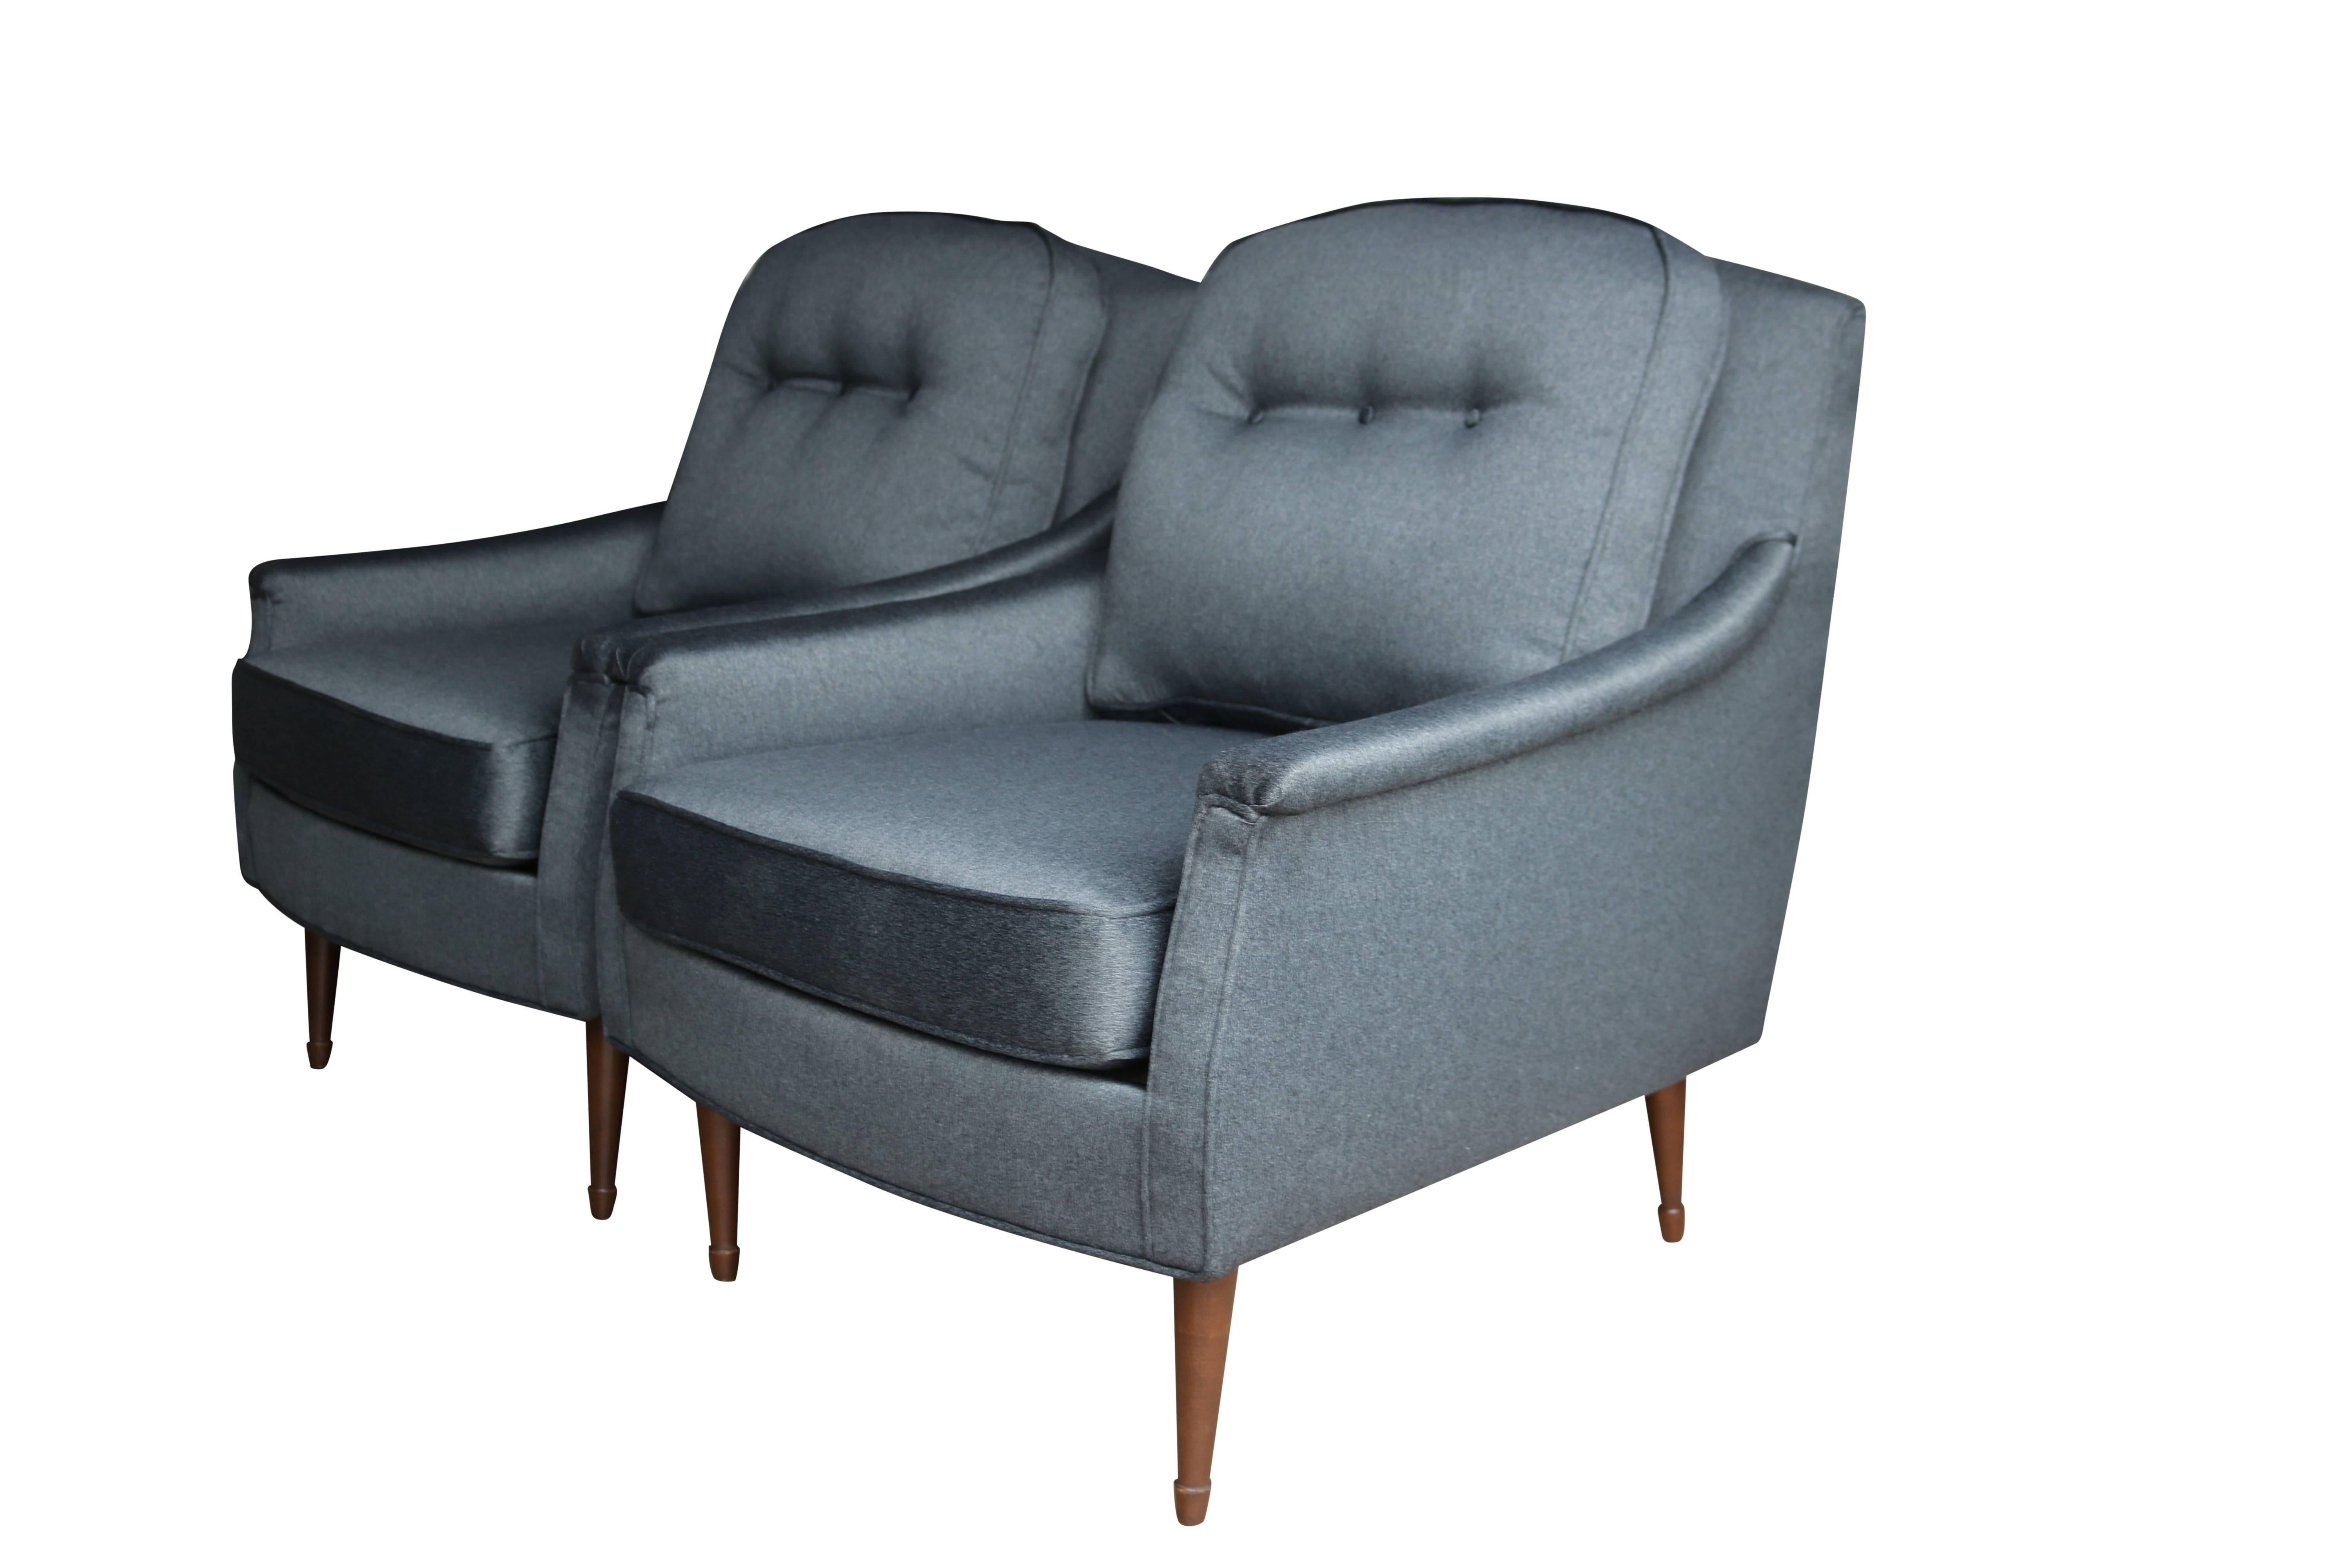 Newly upholstered in a lovely gun metal grey fabric with the slightest hint of sheen, these vintage armchairs will bring masculine sophistication to any room. Walnut legs compliment the look.